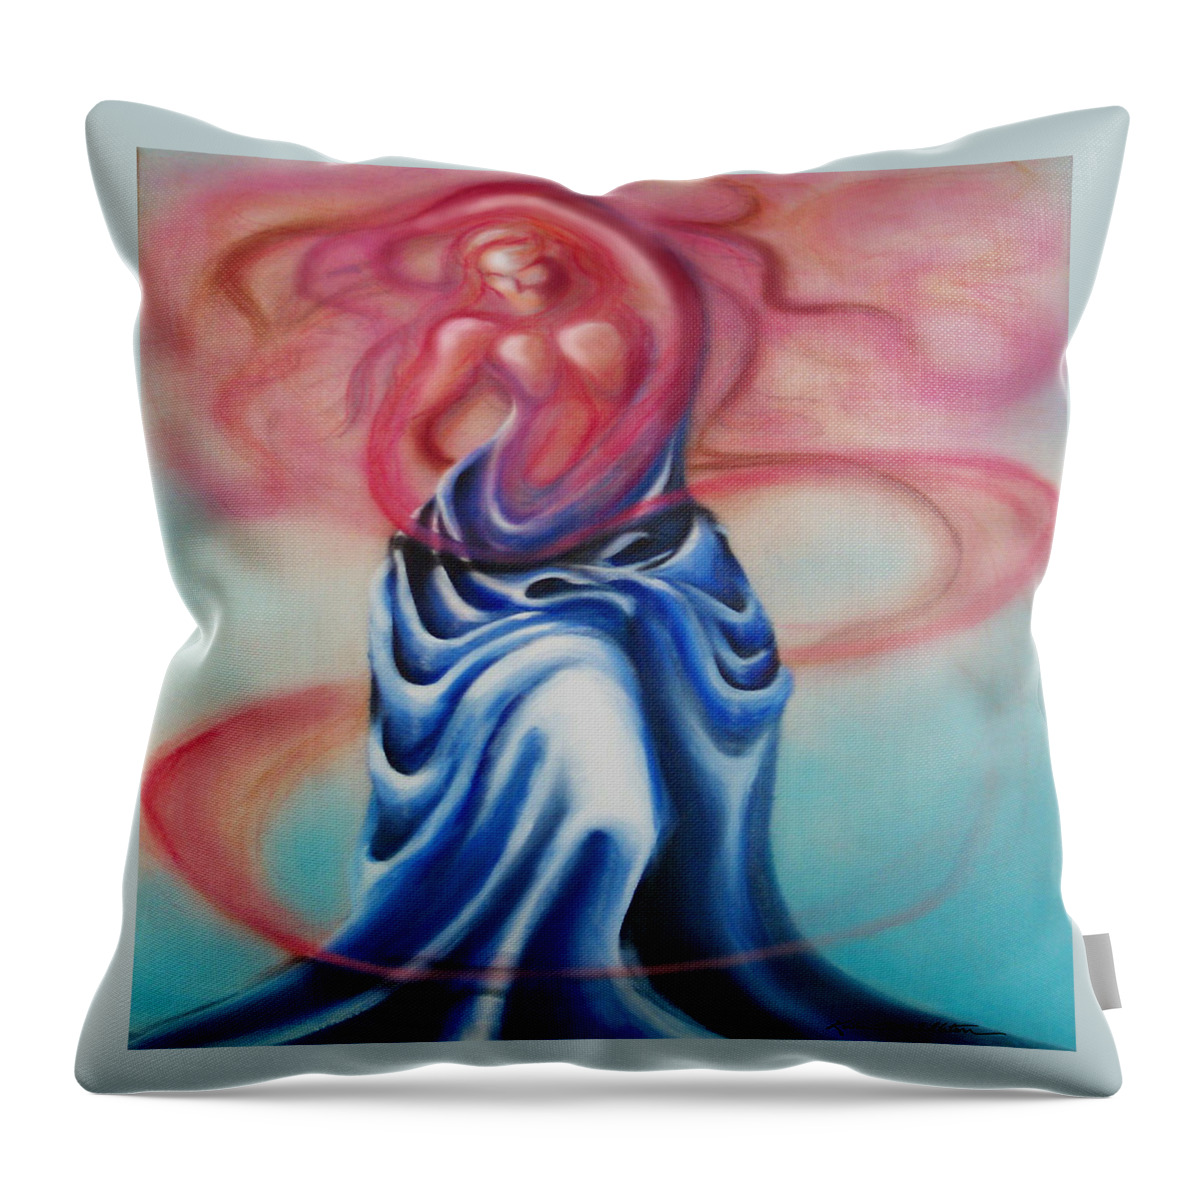 Female Throw Pillow featuring the painting Change by Kevin Middleton